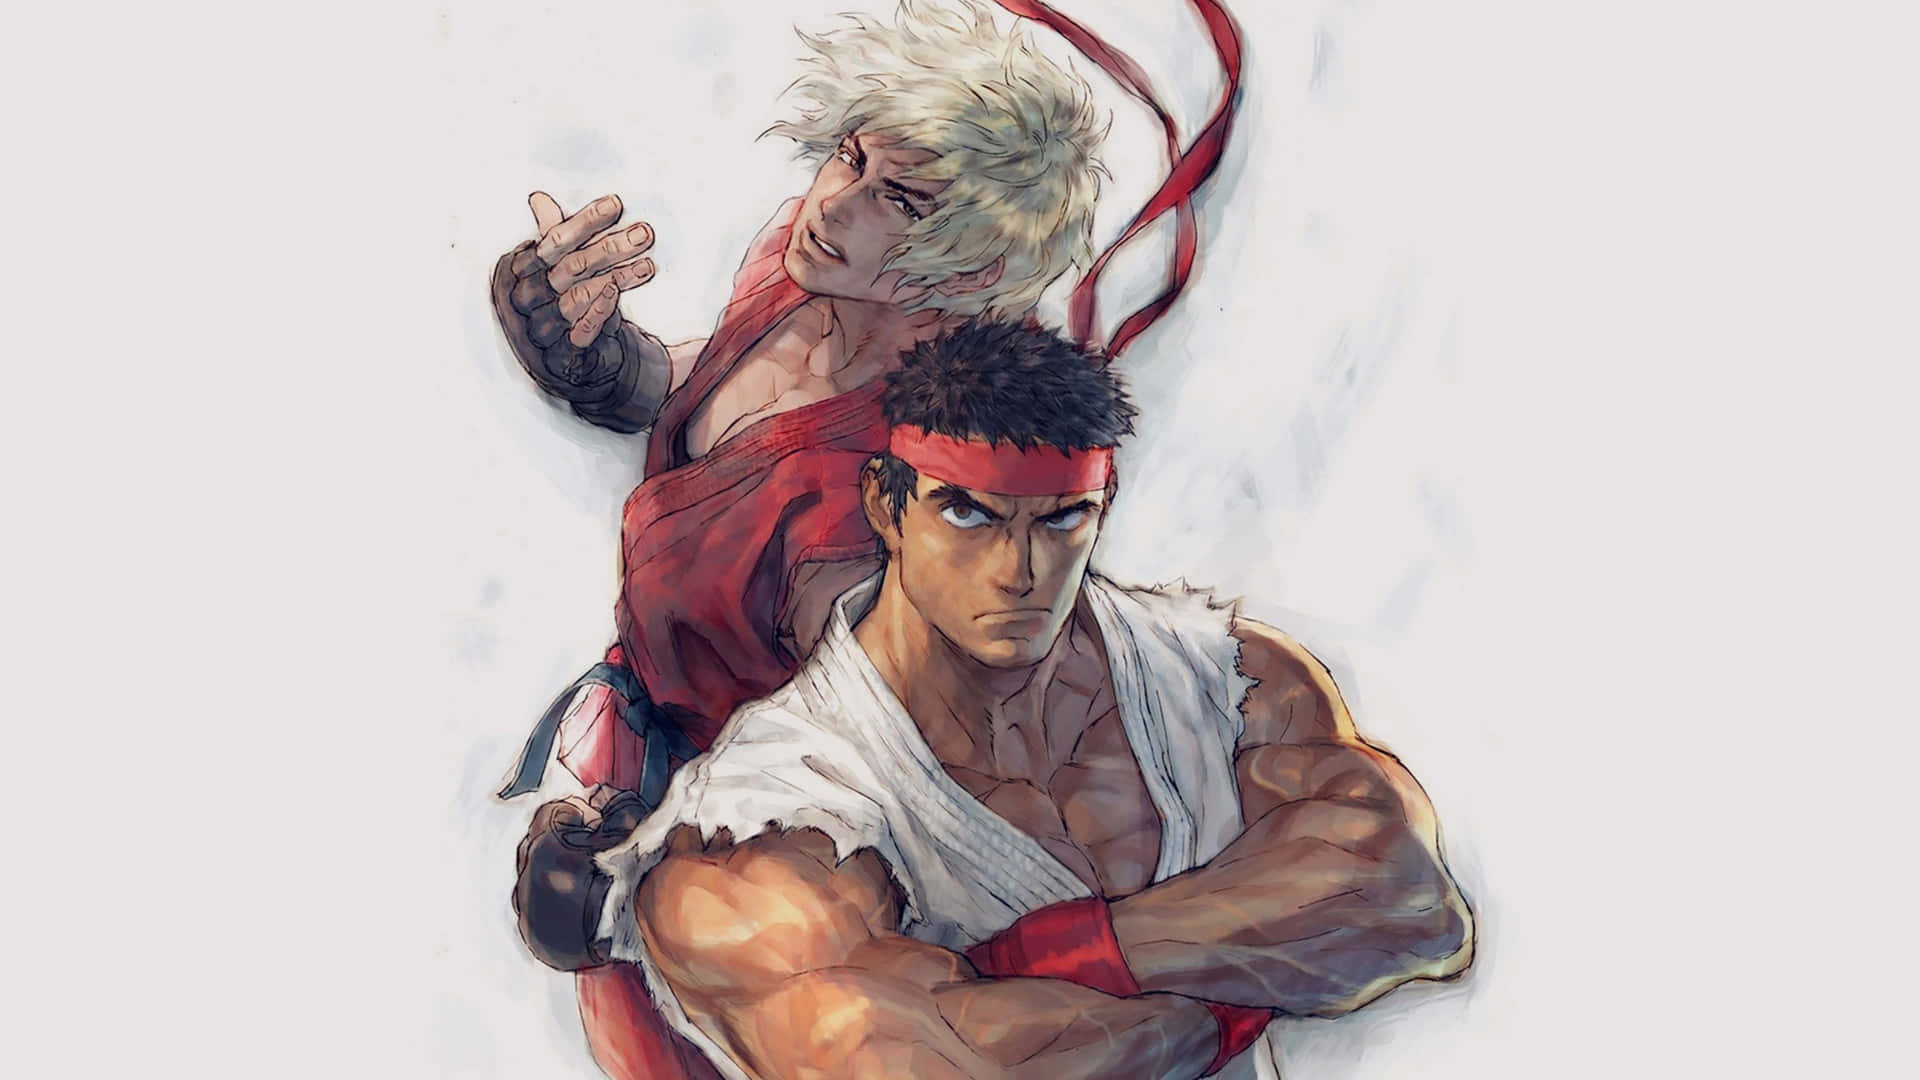 A group of Street Fighter characters ready for the ultimate battle Wallpaper